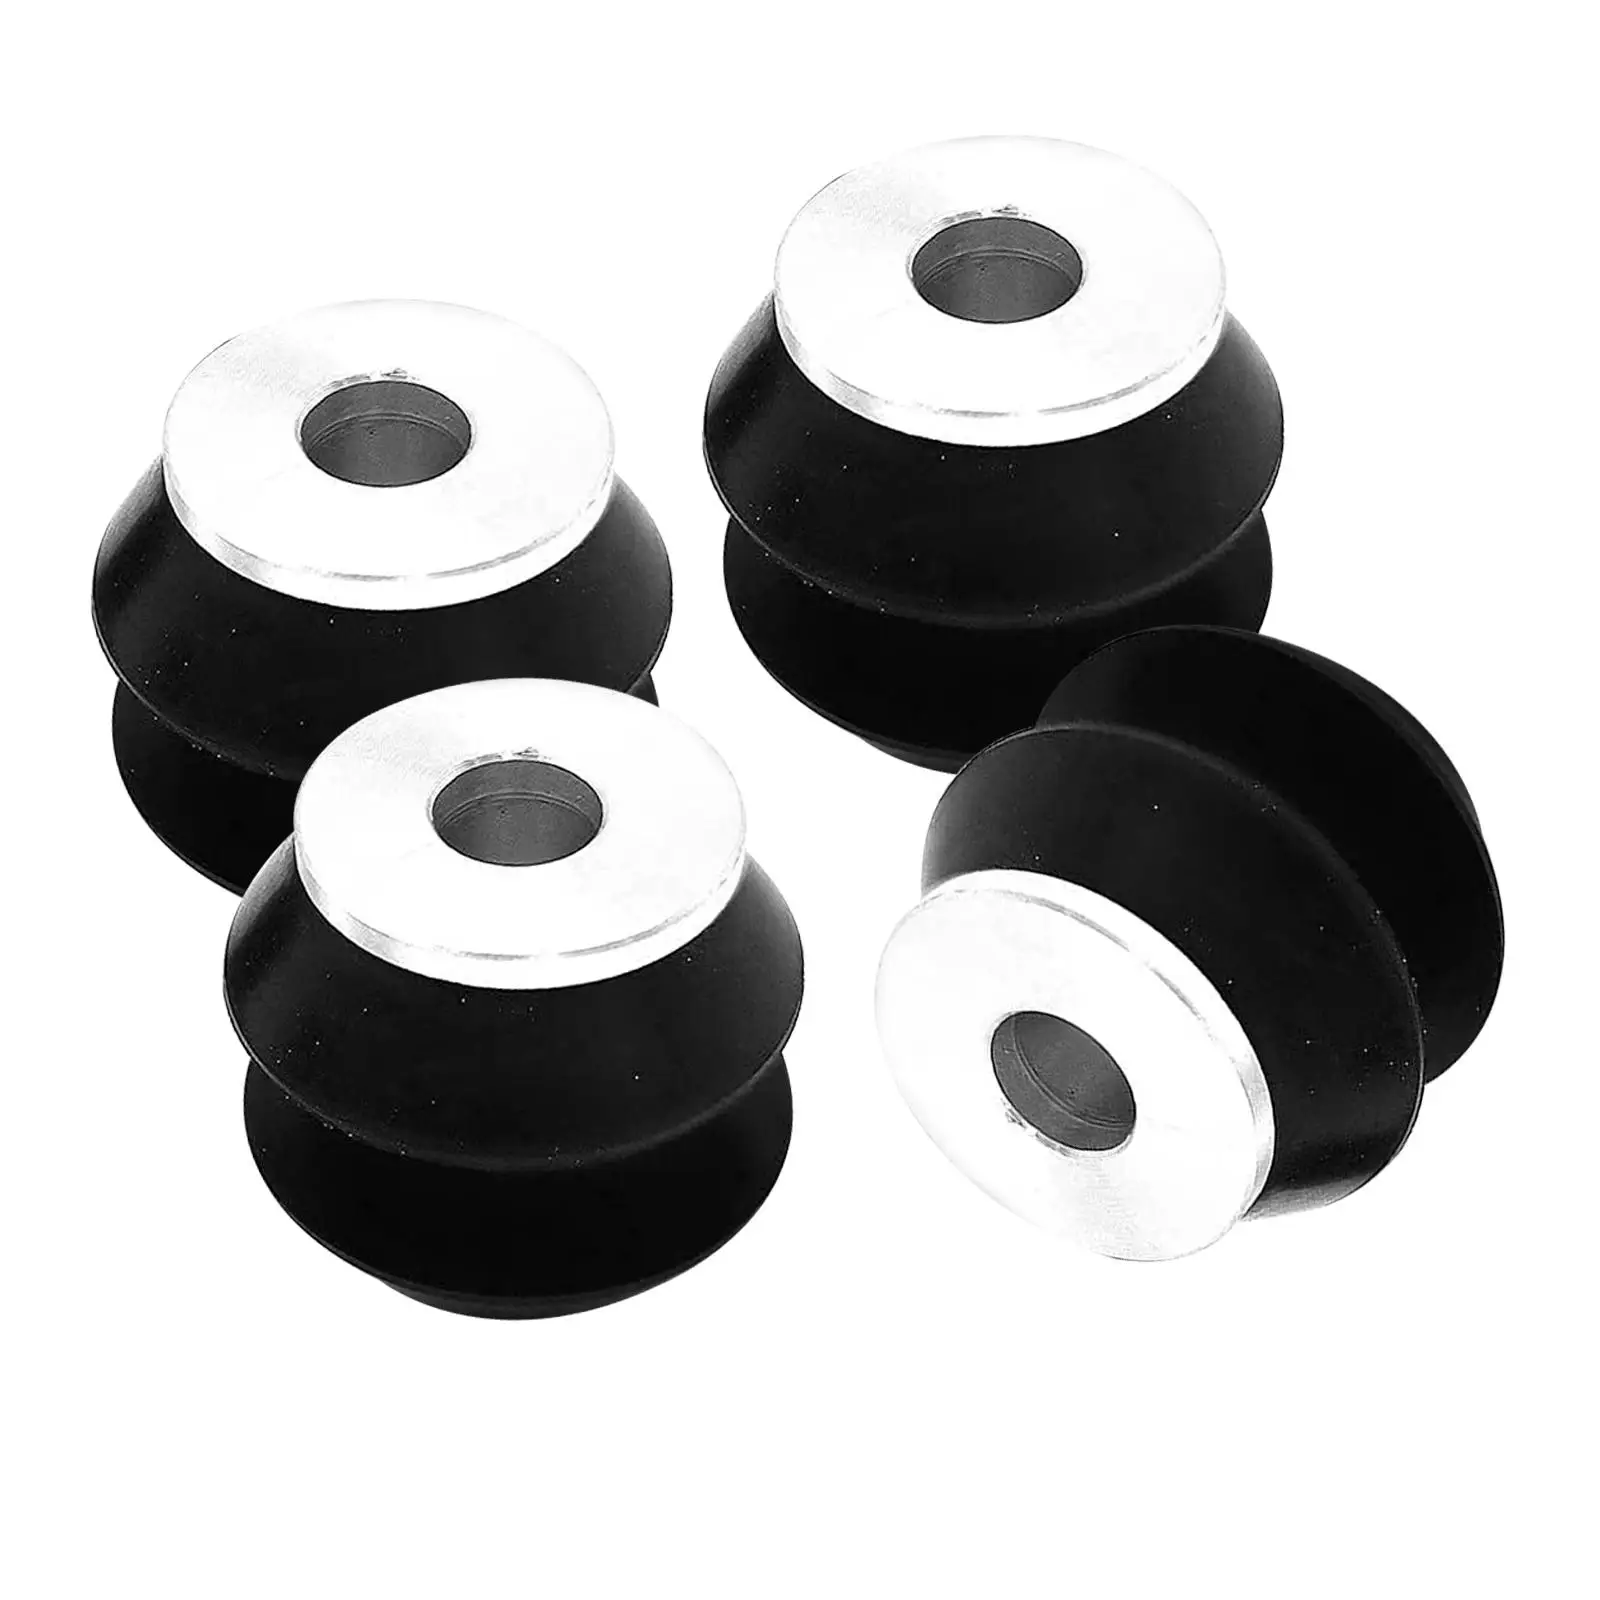 Ficm Mounting Bushing Set VT365 for Ford 6.0L Accessories High Quality